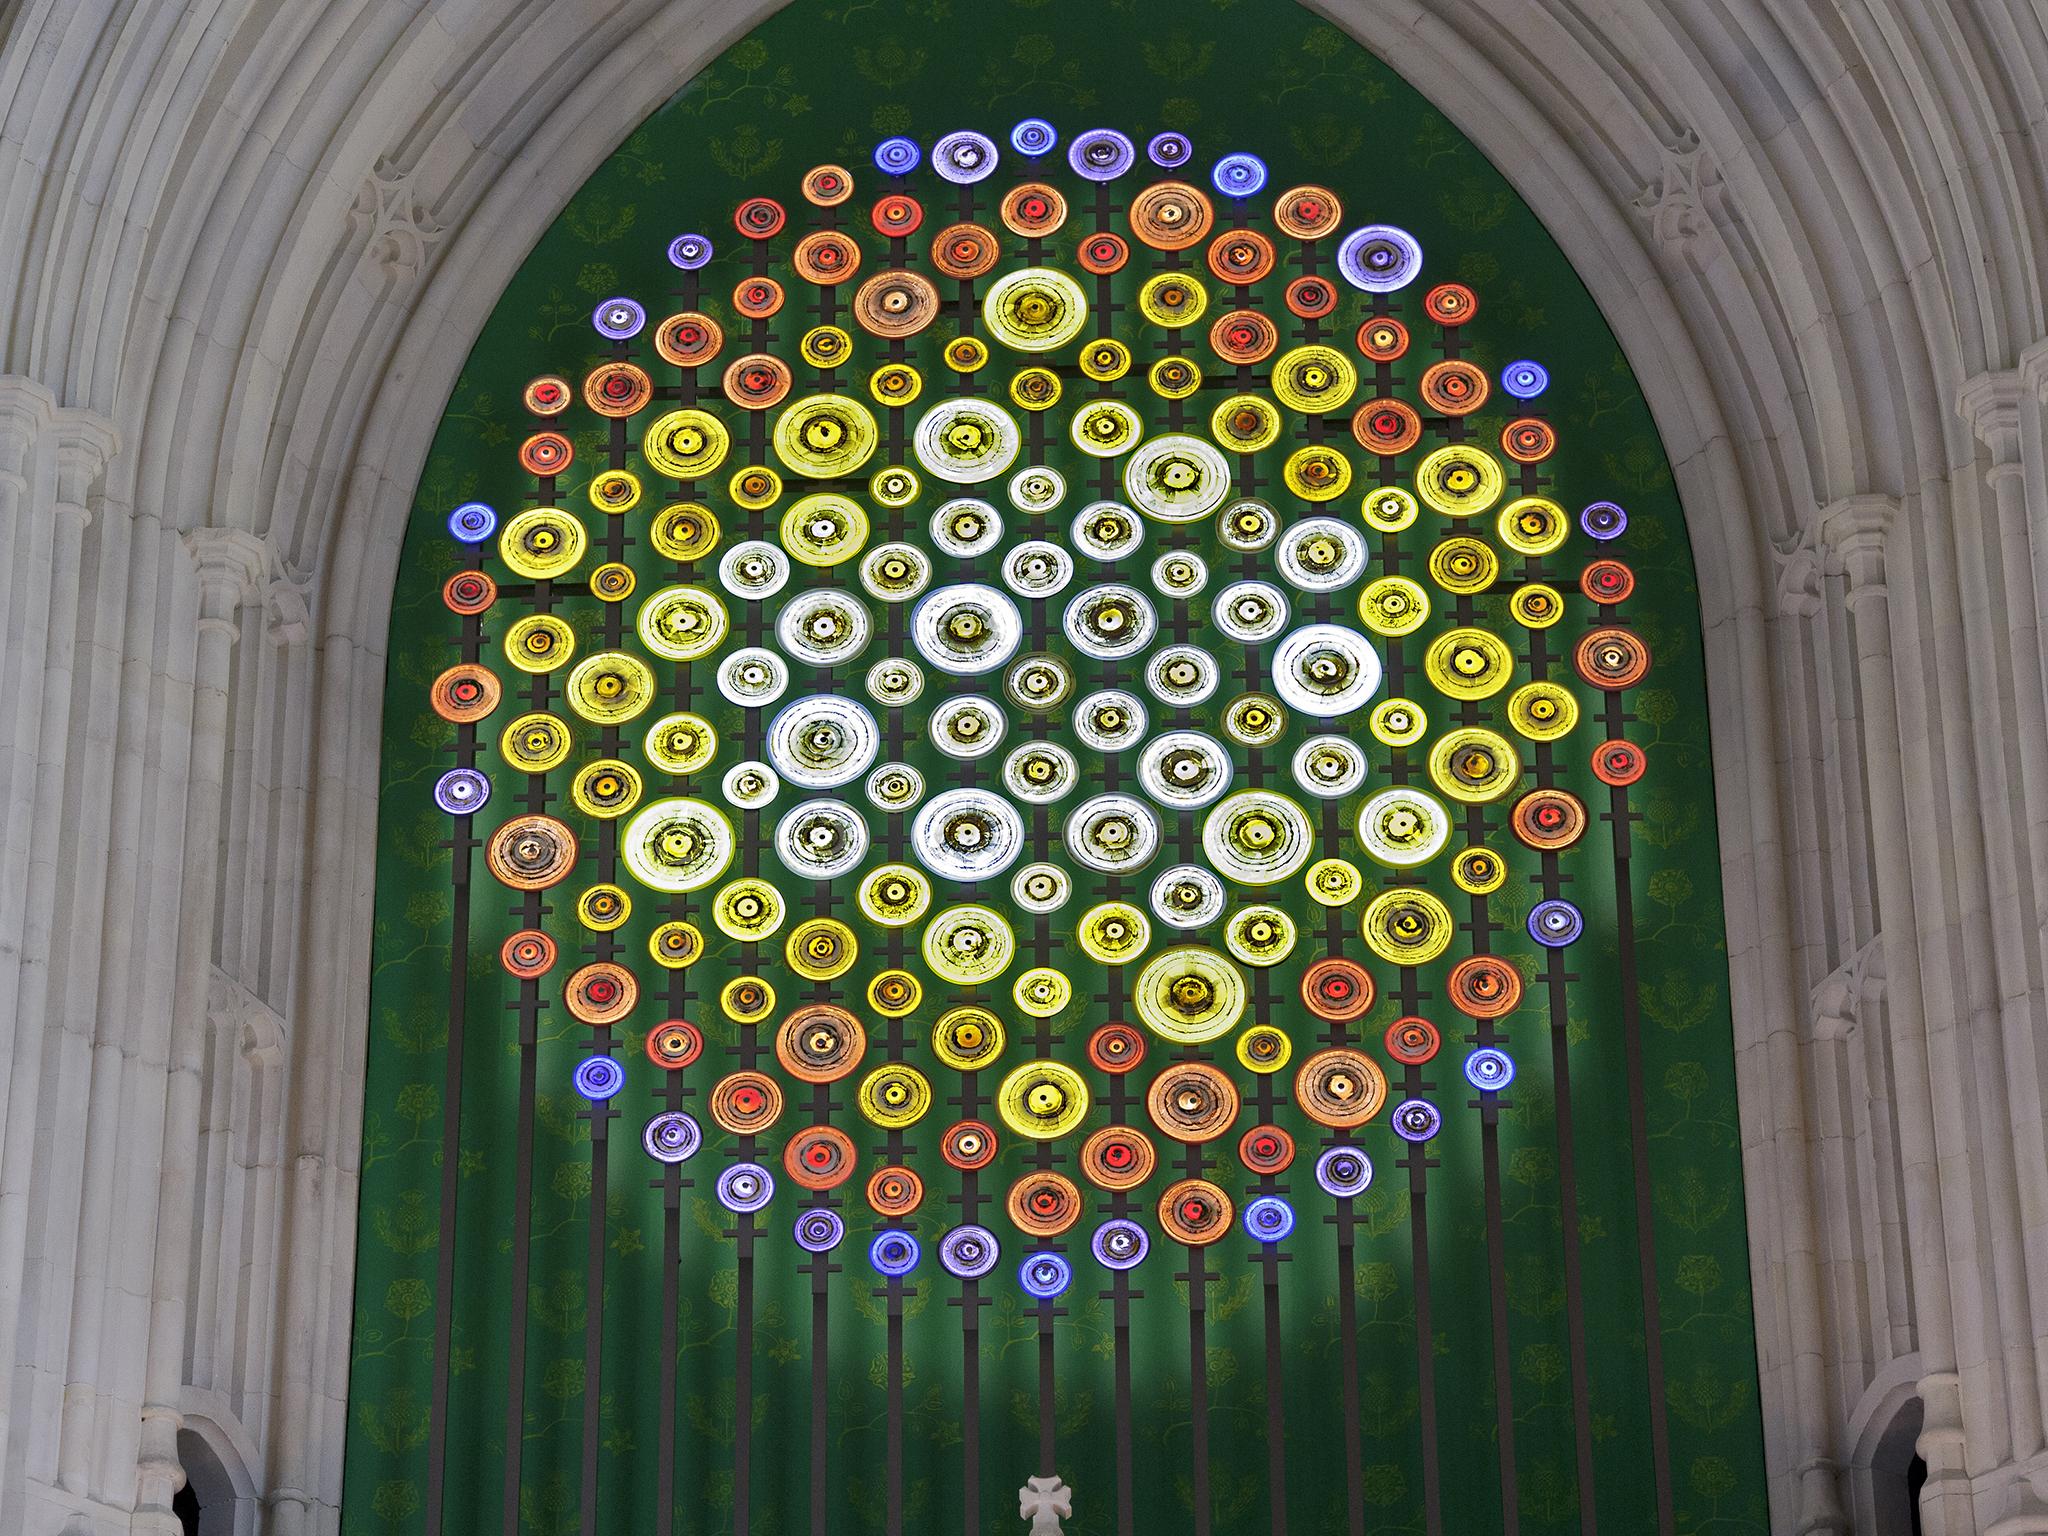 A “New Dawn” now proudly sits above the St Stephens entrance of Westminster Hall, made up 186 individual hand-blown glass scrolls (UK Parliament/Jessica Taylor)